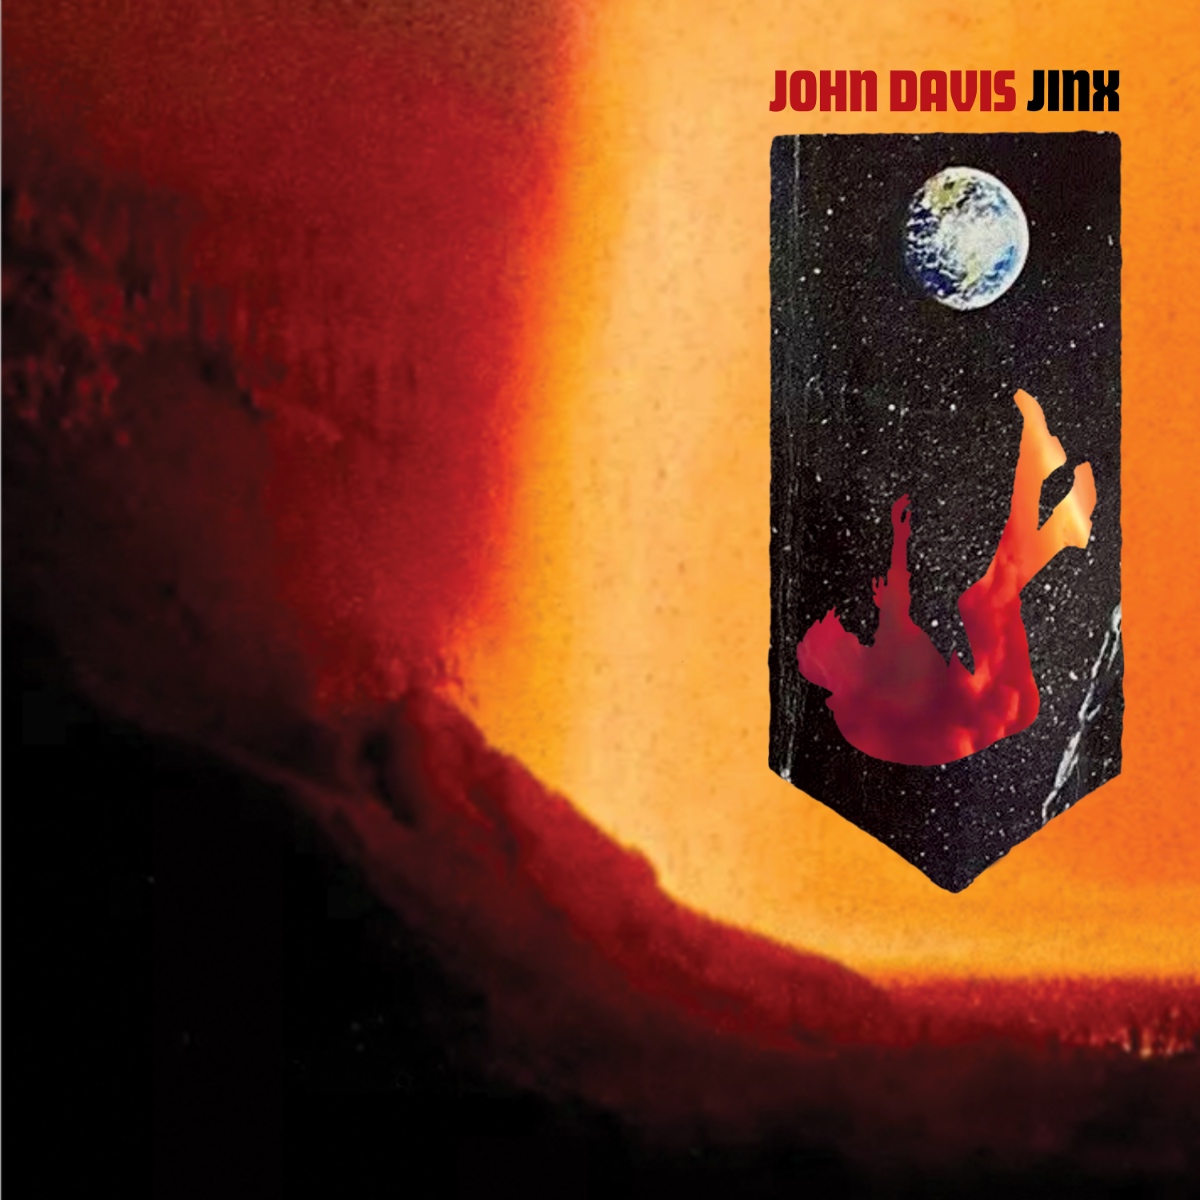 JINX, the long-awaited new John Davis album, is now available for pre-order!